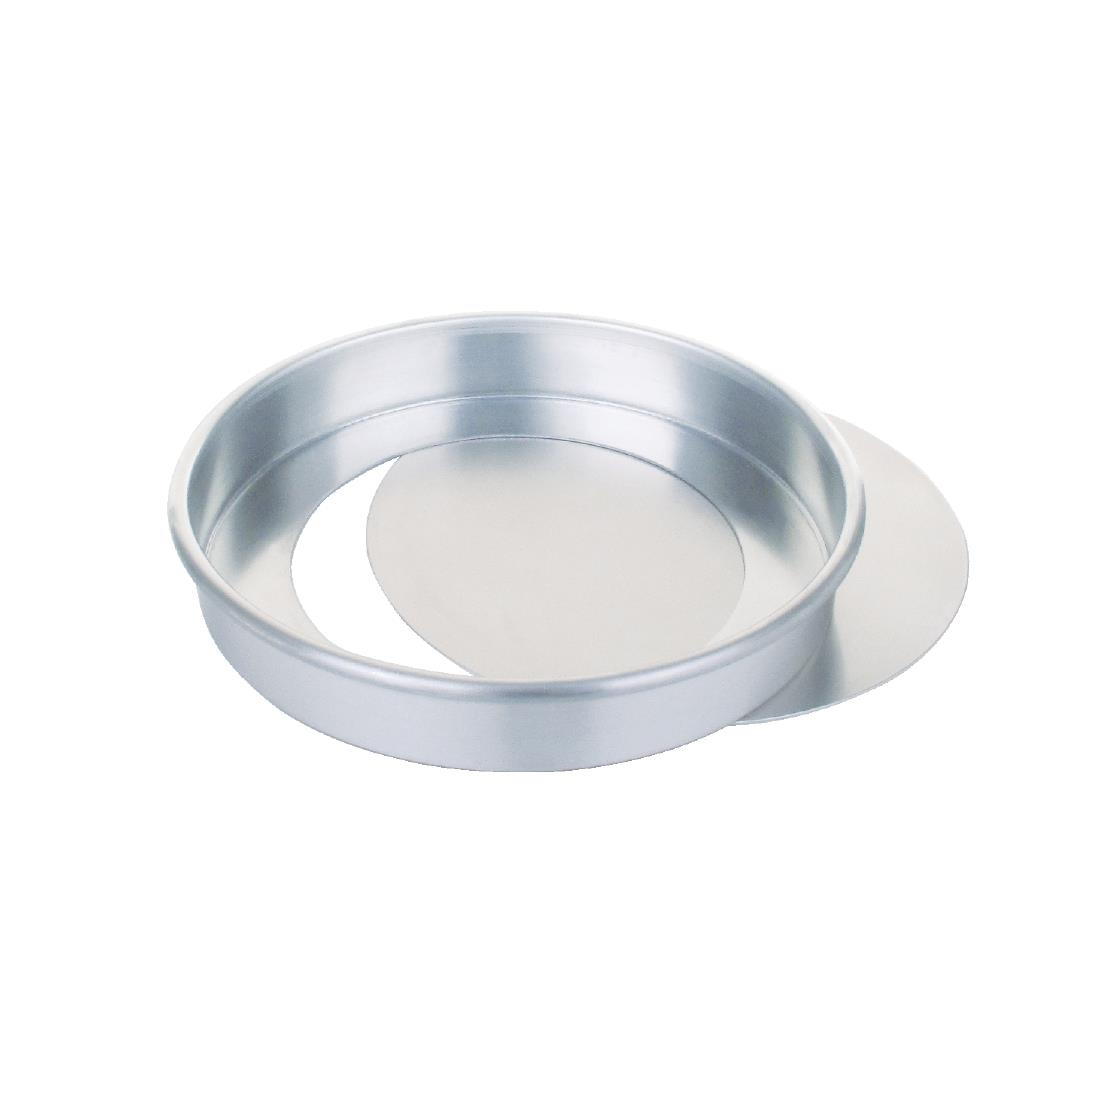 Aluminium Sandwich Cake Tin With Removable Base 200mm JD Catering Equipment Solutions Ltd